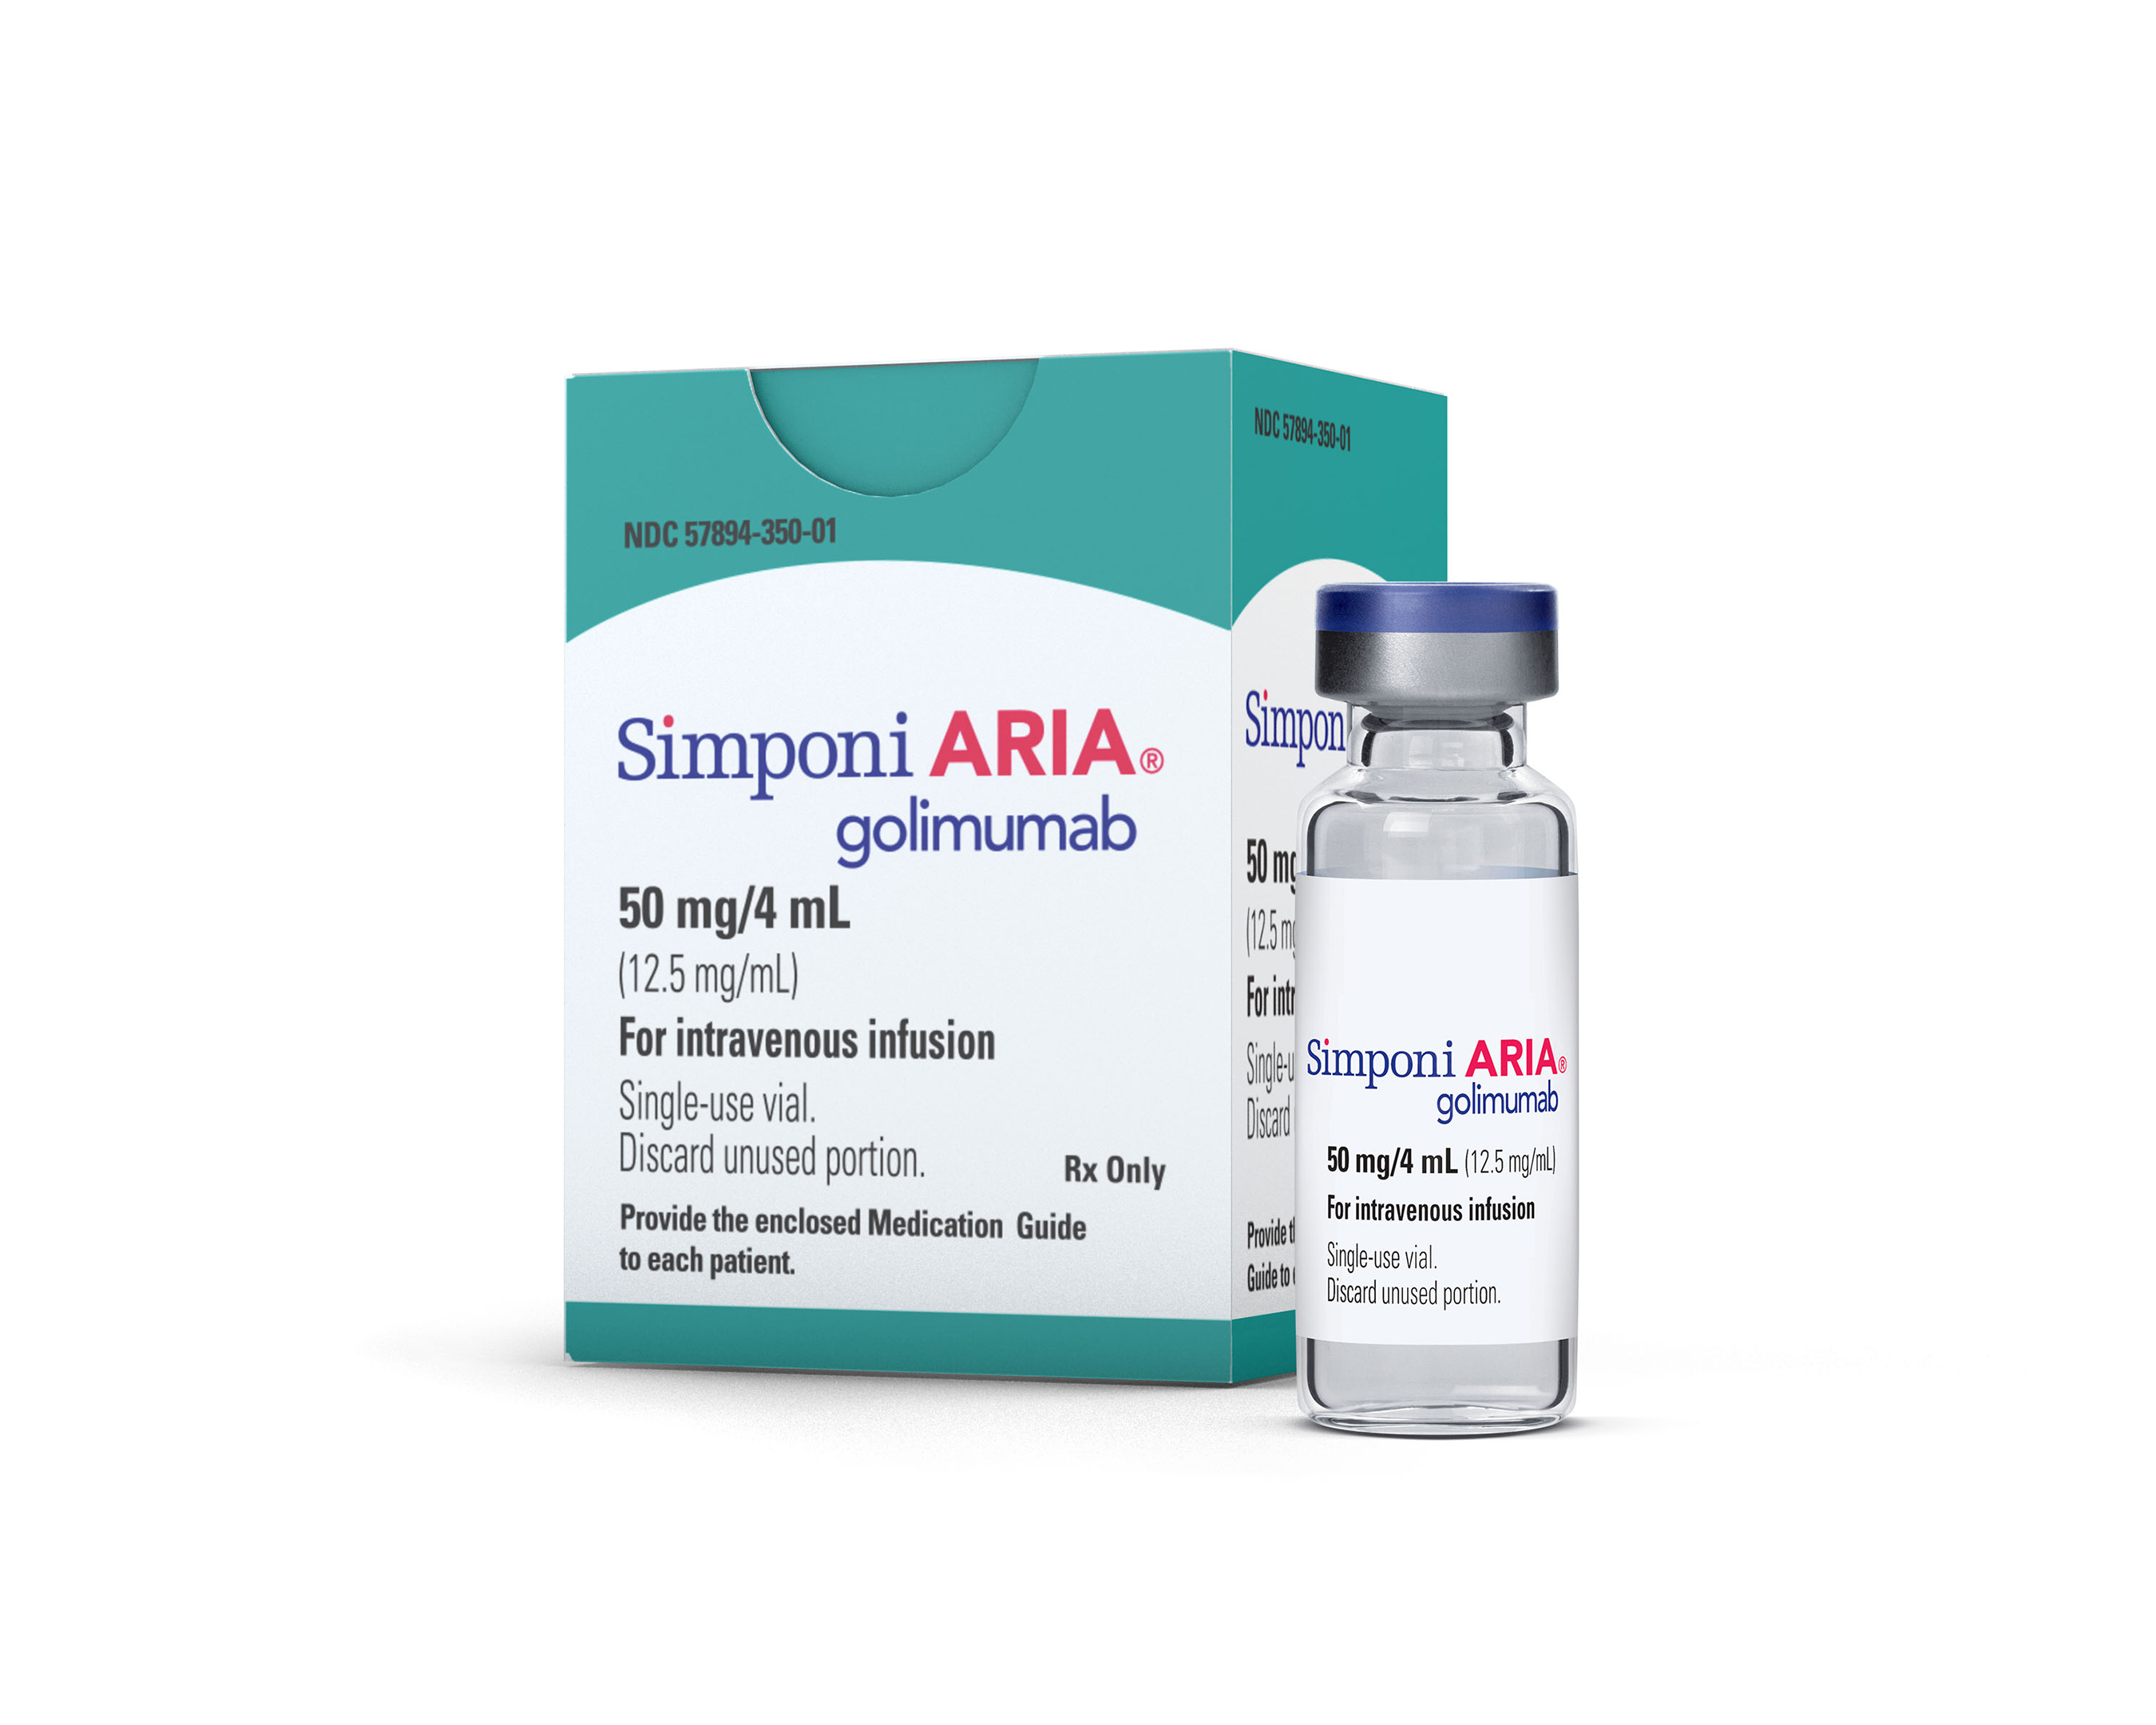 Janssen Receives Two U S FDA Approvals For SIMPONI ARIA Golimumab 